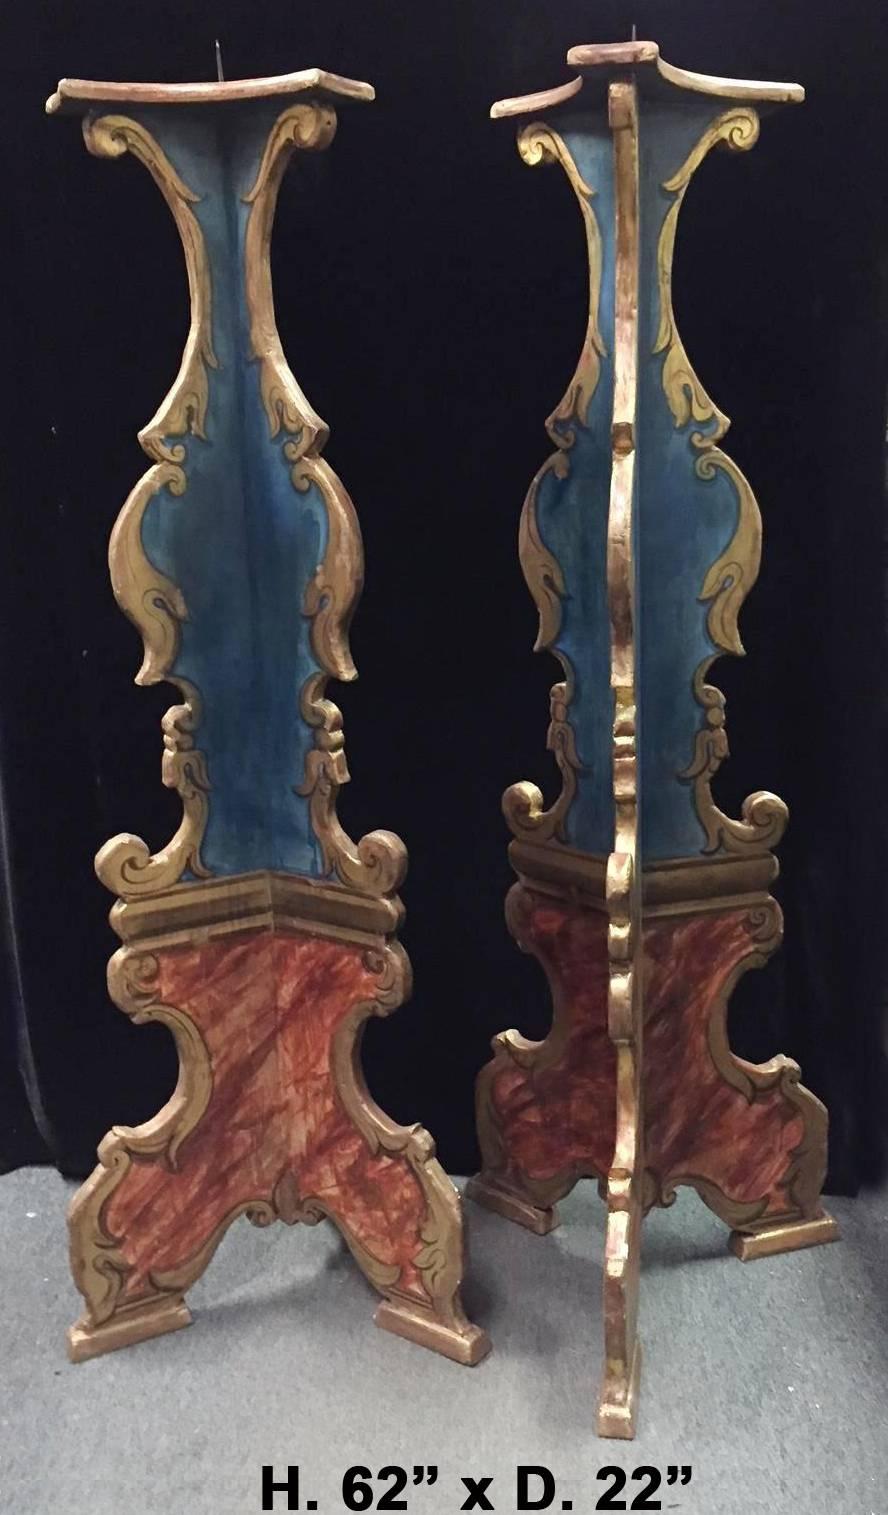 Attractive pair of Italian Baroque style hand-painted torchers outlined with gold trimming in the form of scrolls and foliage, all resting on tripod pricket feet. Mid-20th century.

 